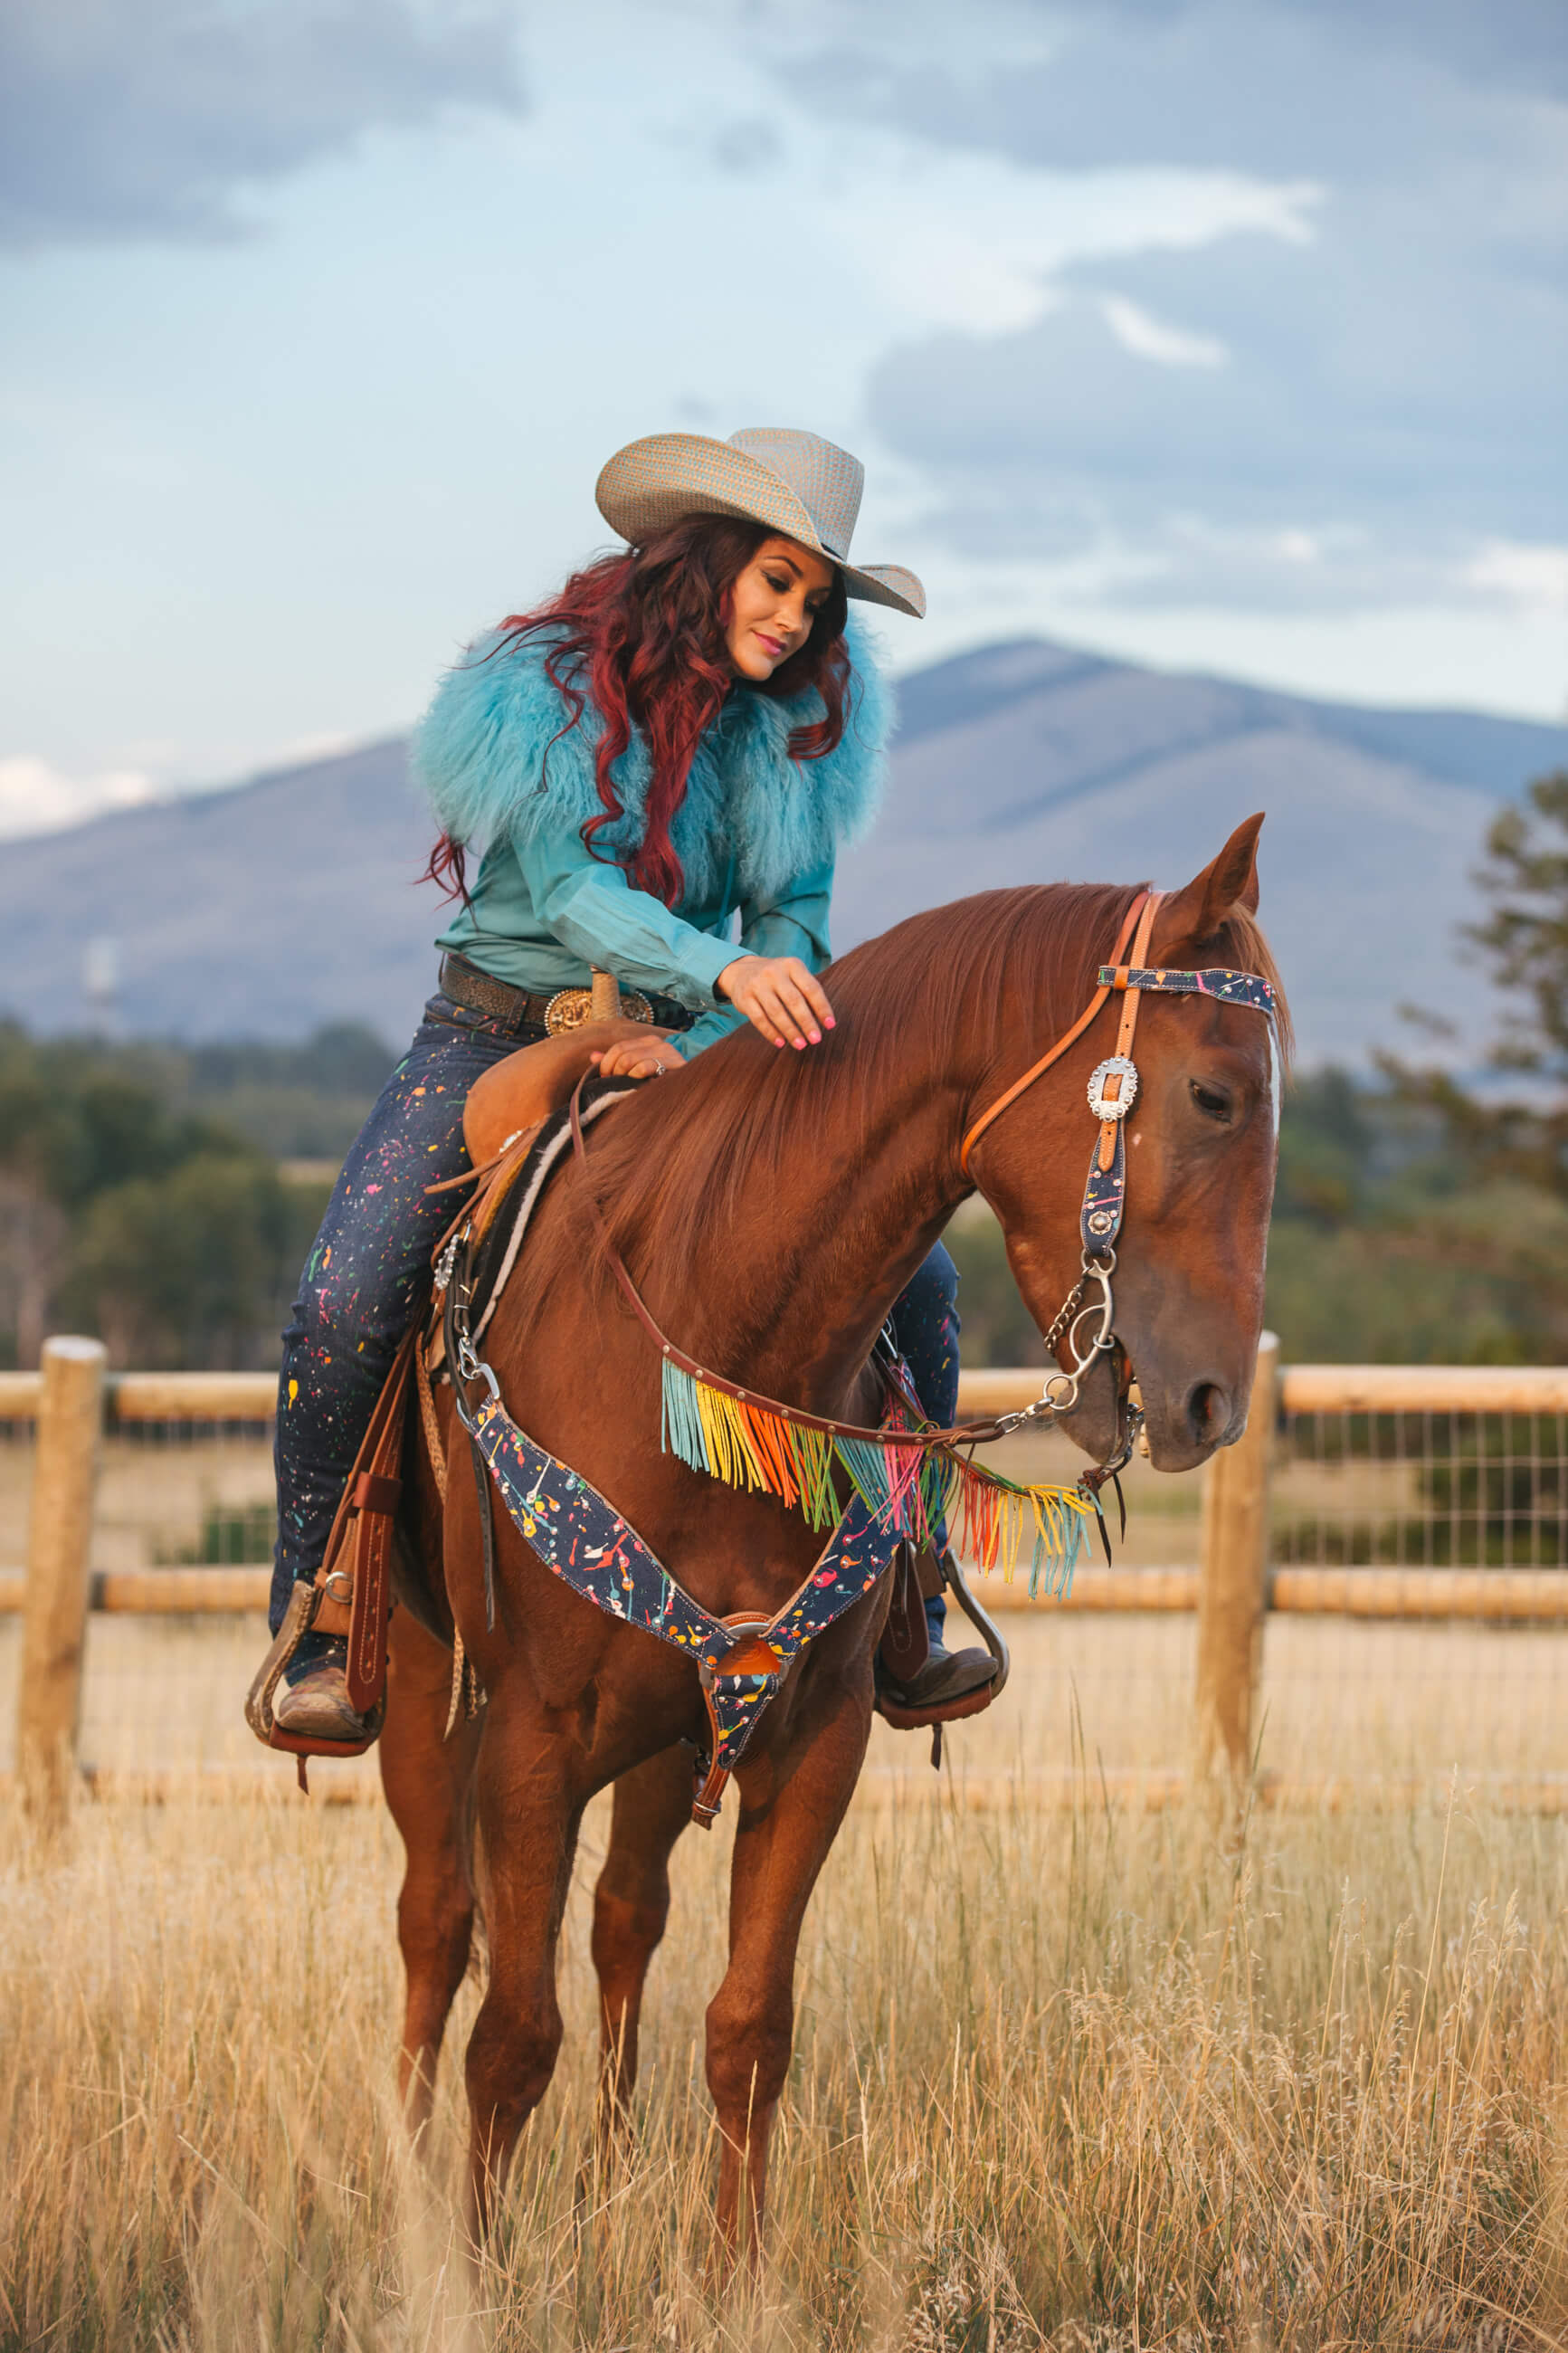 Fallon Taylor plays with the mane on her horse Babyflo in Missoula Montana